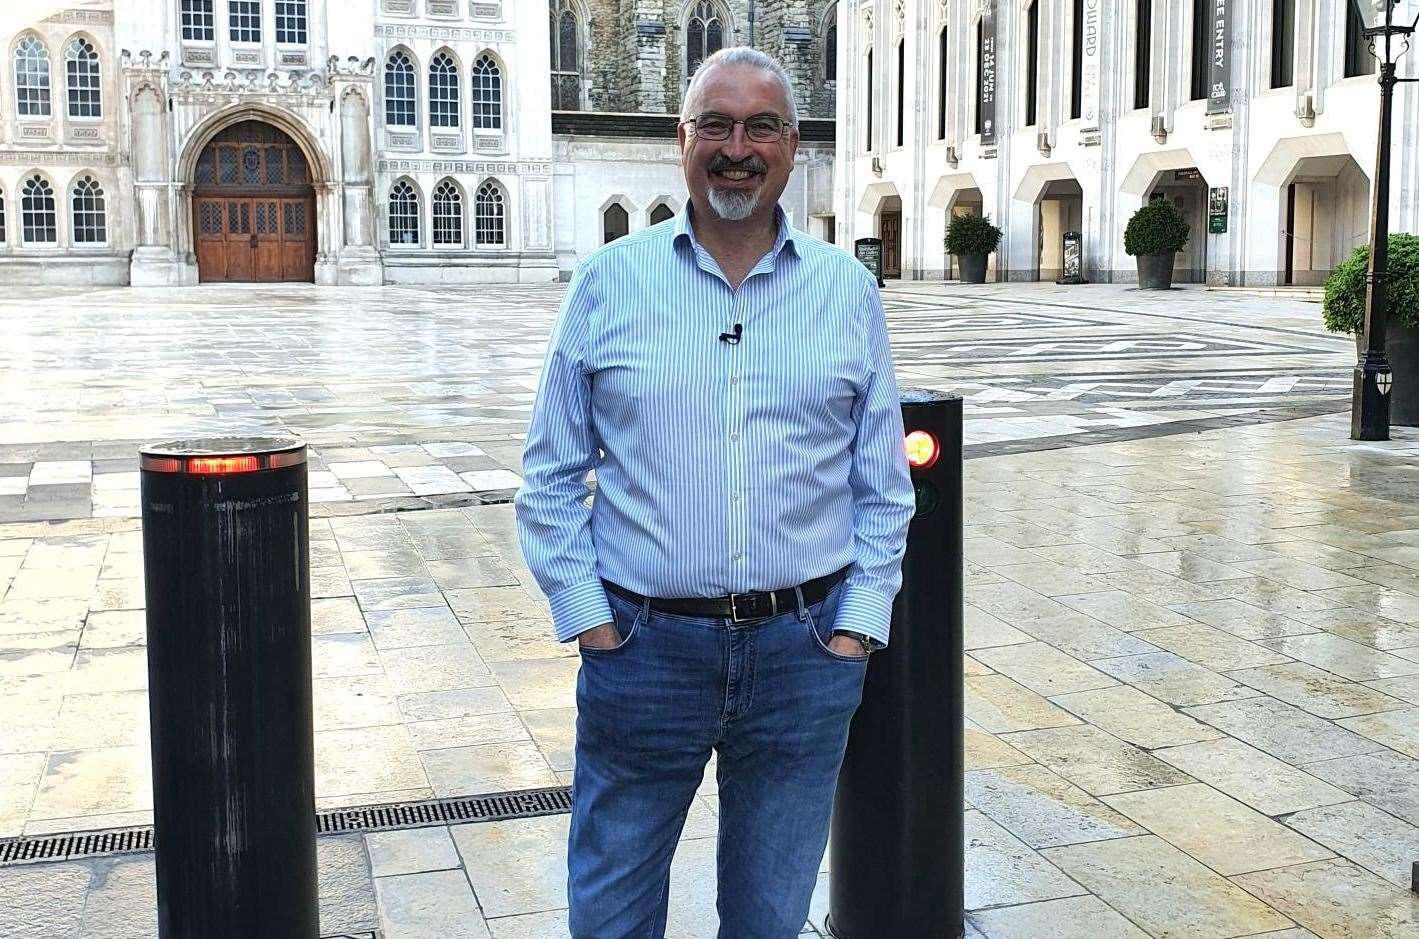 Dr Simon Elliott at the Guildhall courtyard in the City of London, standing above the Roman amphitheatre - he is a regularly on Hit History - the history buff's own version of Netflix